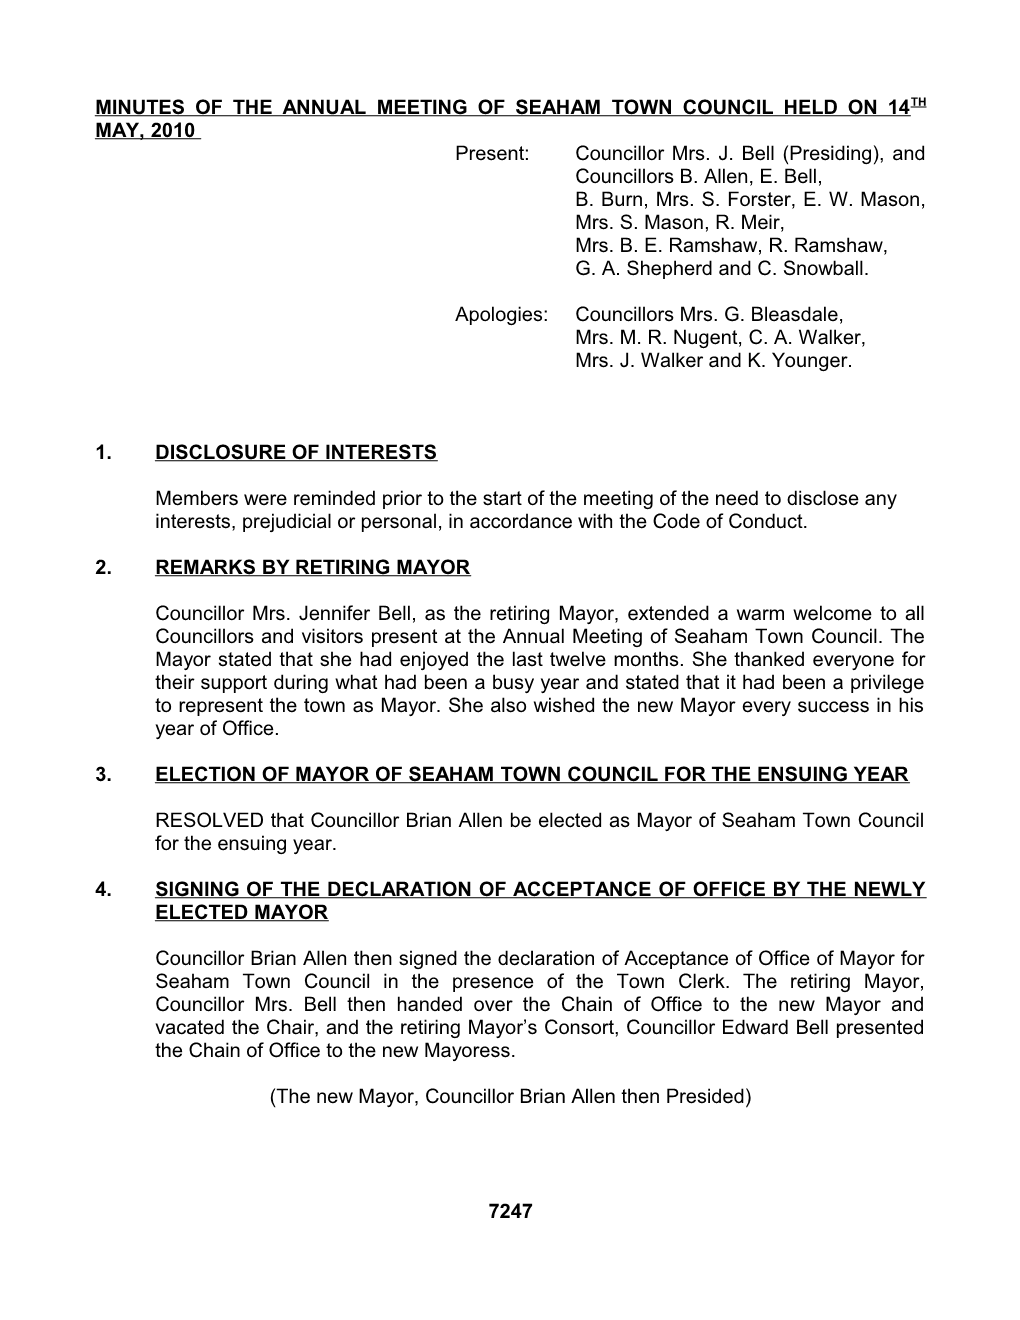 Minutes of the Annual Meeting of Seaham Town Council Held on 15Th May, 2009